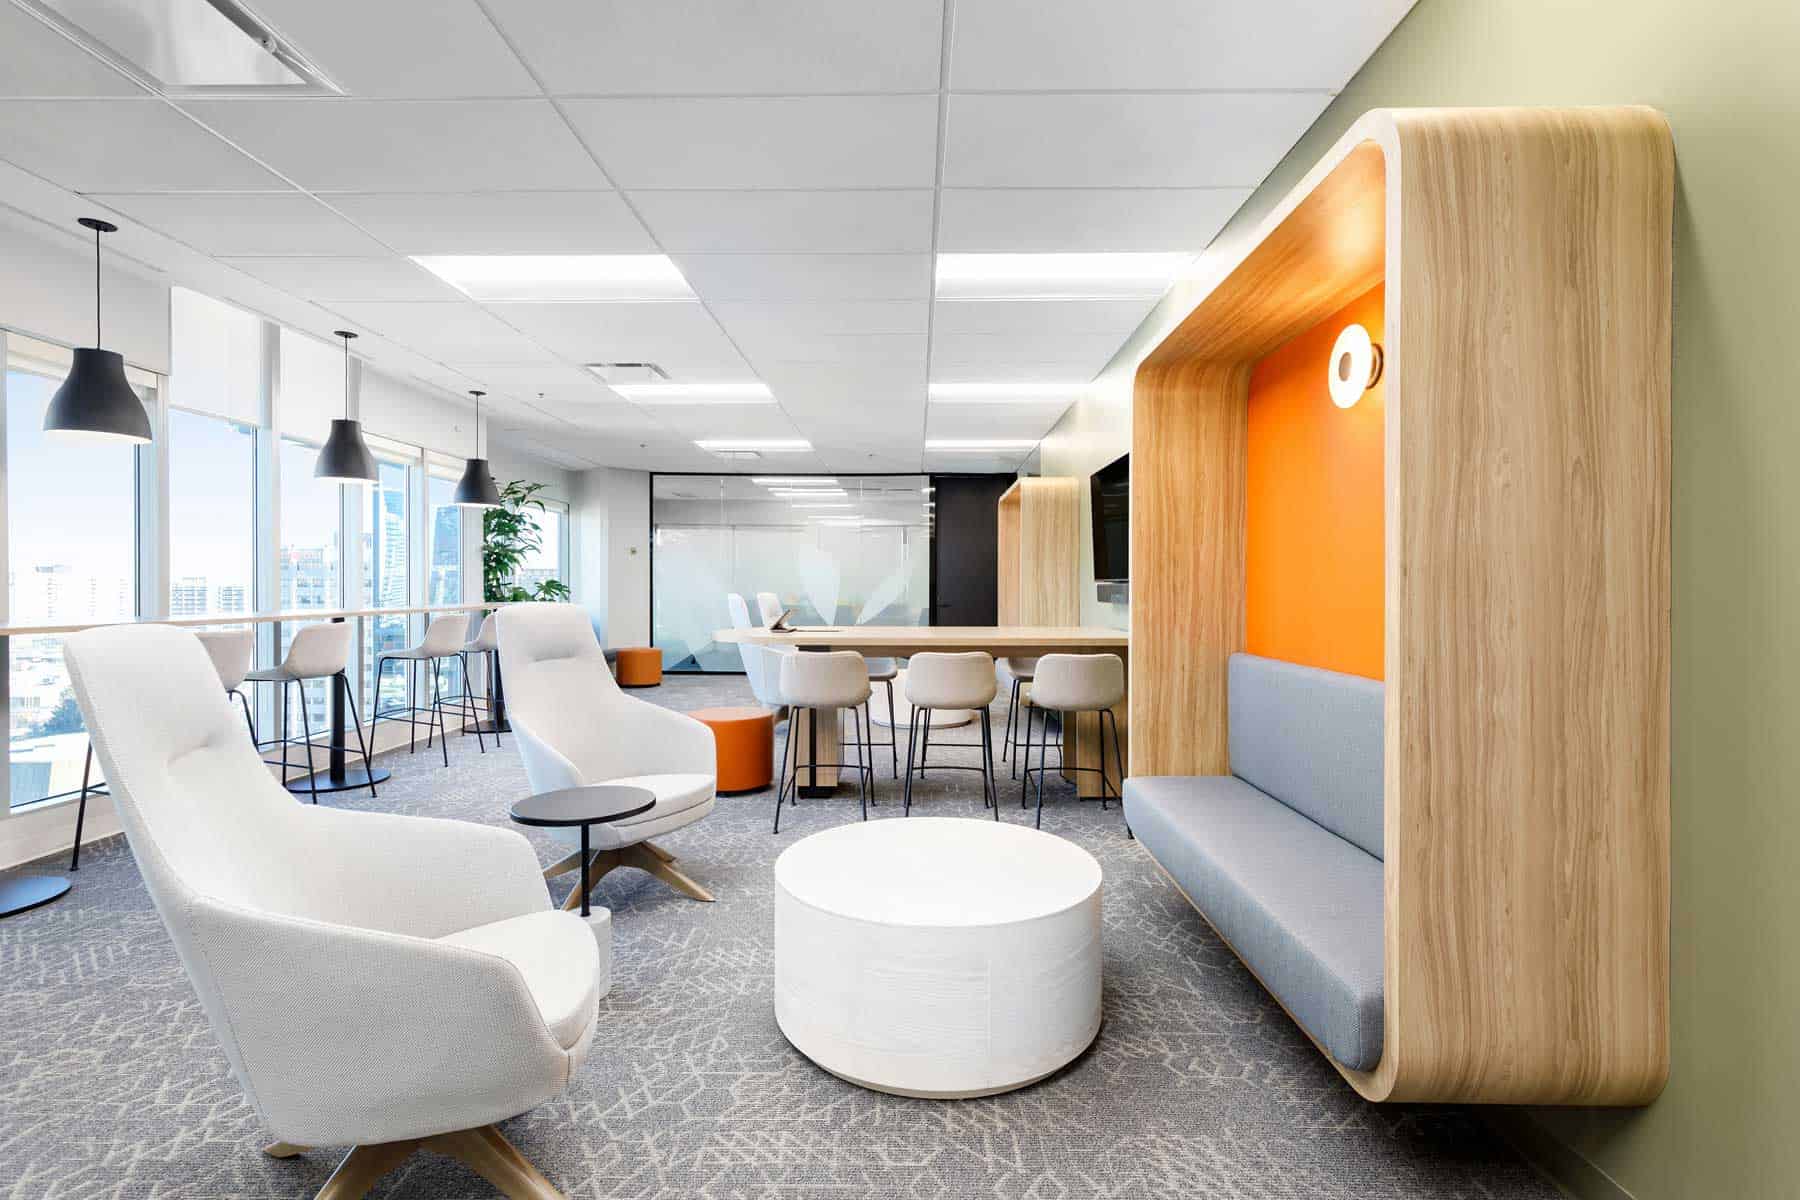 Adaptable and flexible workspaces